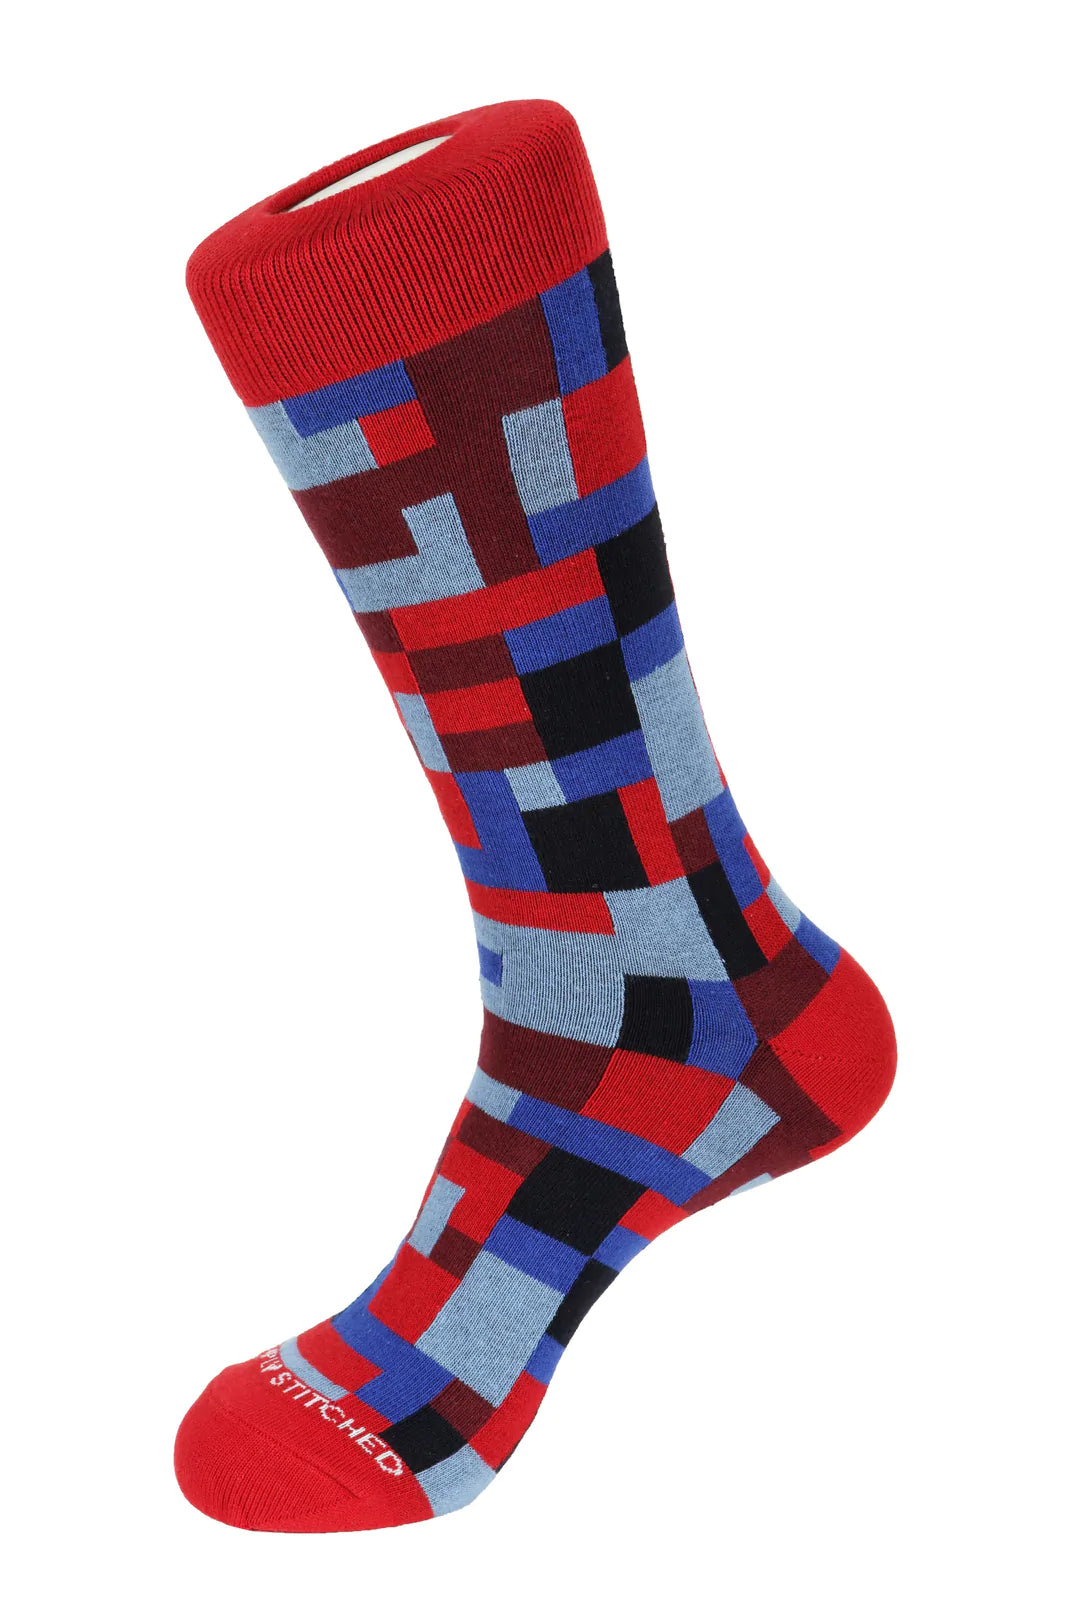 Unsimply Stitched maroon socks with multi colored geometric shapes, making it a great pairing with DFR89 blue denim jeans and a fun Sugar sport shirt.